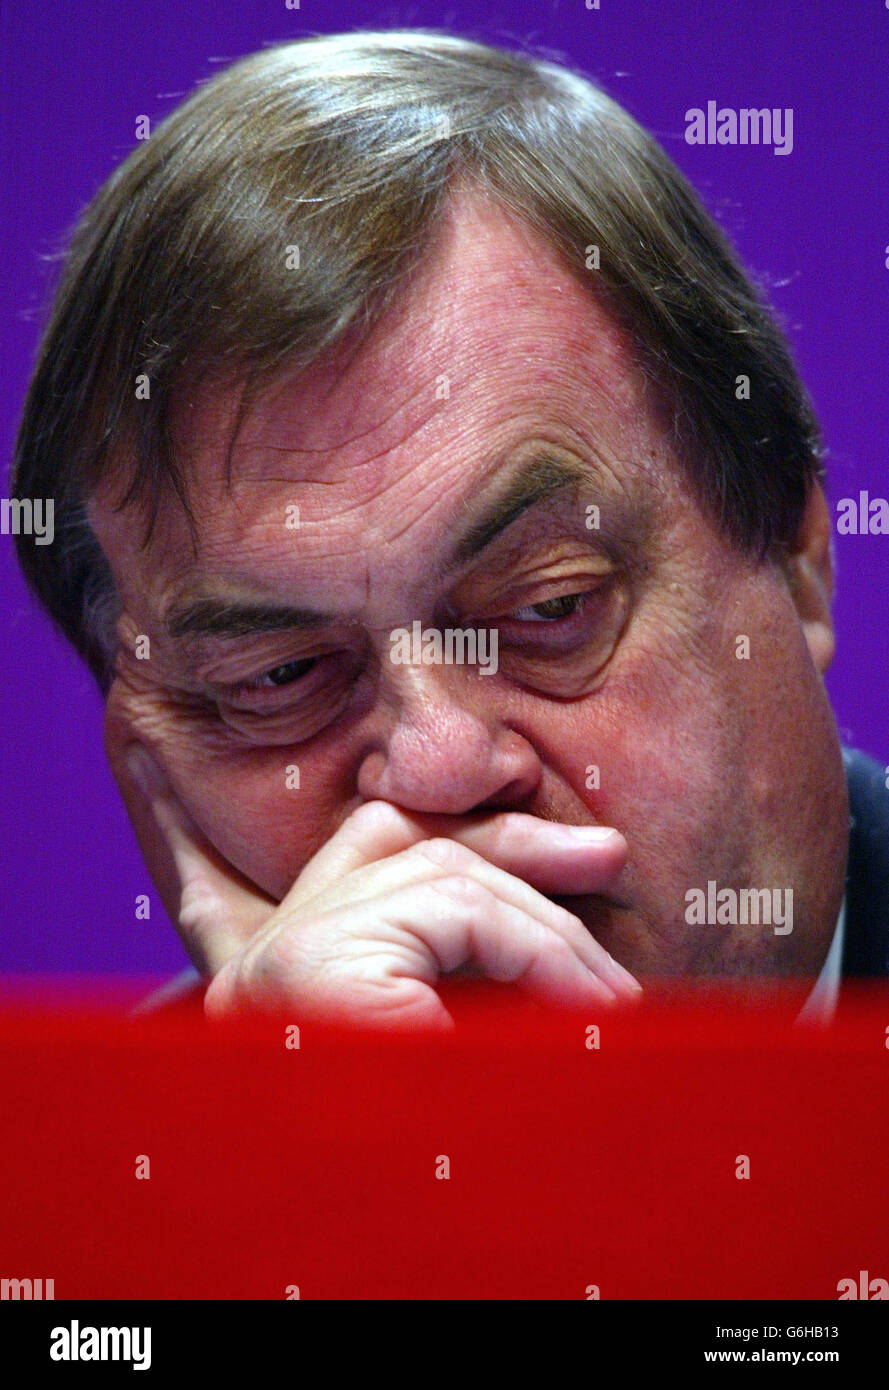 Deputy Prime Minister John Prescott listens to Gordon Brown, Chancellor of the Exchequer, delivering his speech to party delegates, on the second day of the annual Labour Party Conference in Bournemouth. Mr Brown today declared that the Government is steeled to take the top decisions needed to achieve social justice - warning that the Labour way will often involve taking 'the hard road'. In his keynote speech, he cautioned that only by being true to its values and objectives would the Government regain the public's trust following its recent troubles. Stock Photo